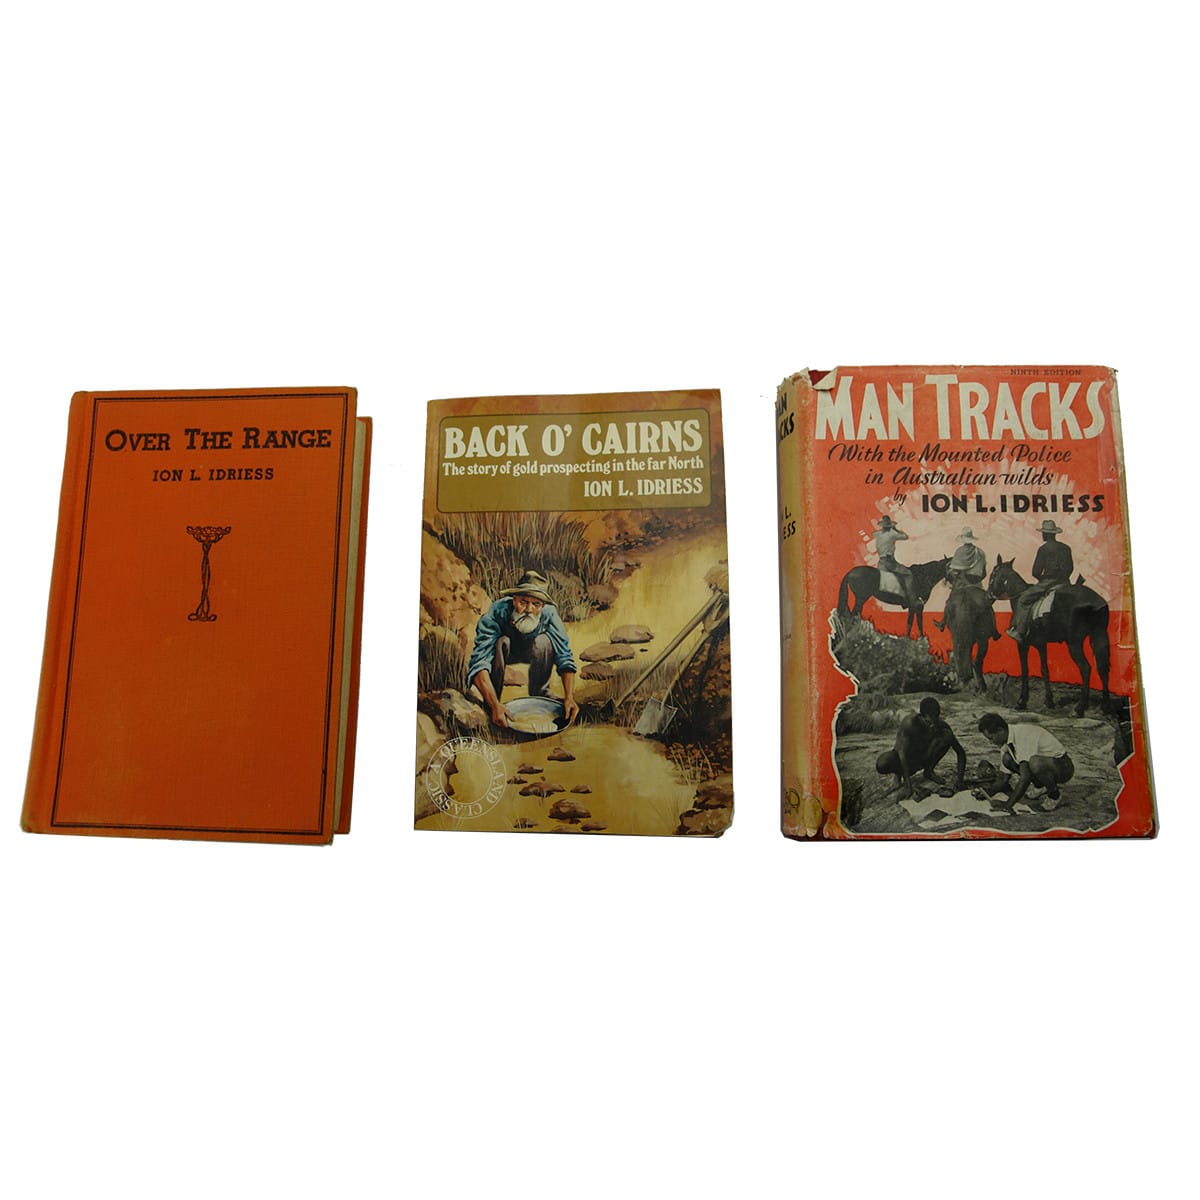 Books. Over The Range, Ion L. Idriess; Back O' Cairns, The story of gold prospecting in the far North, Ion L. Idriess; Man Tracks, With the Mounted Police in Australian wilds, Ion L. Idriess.